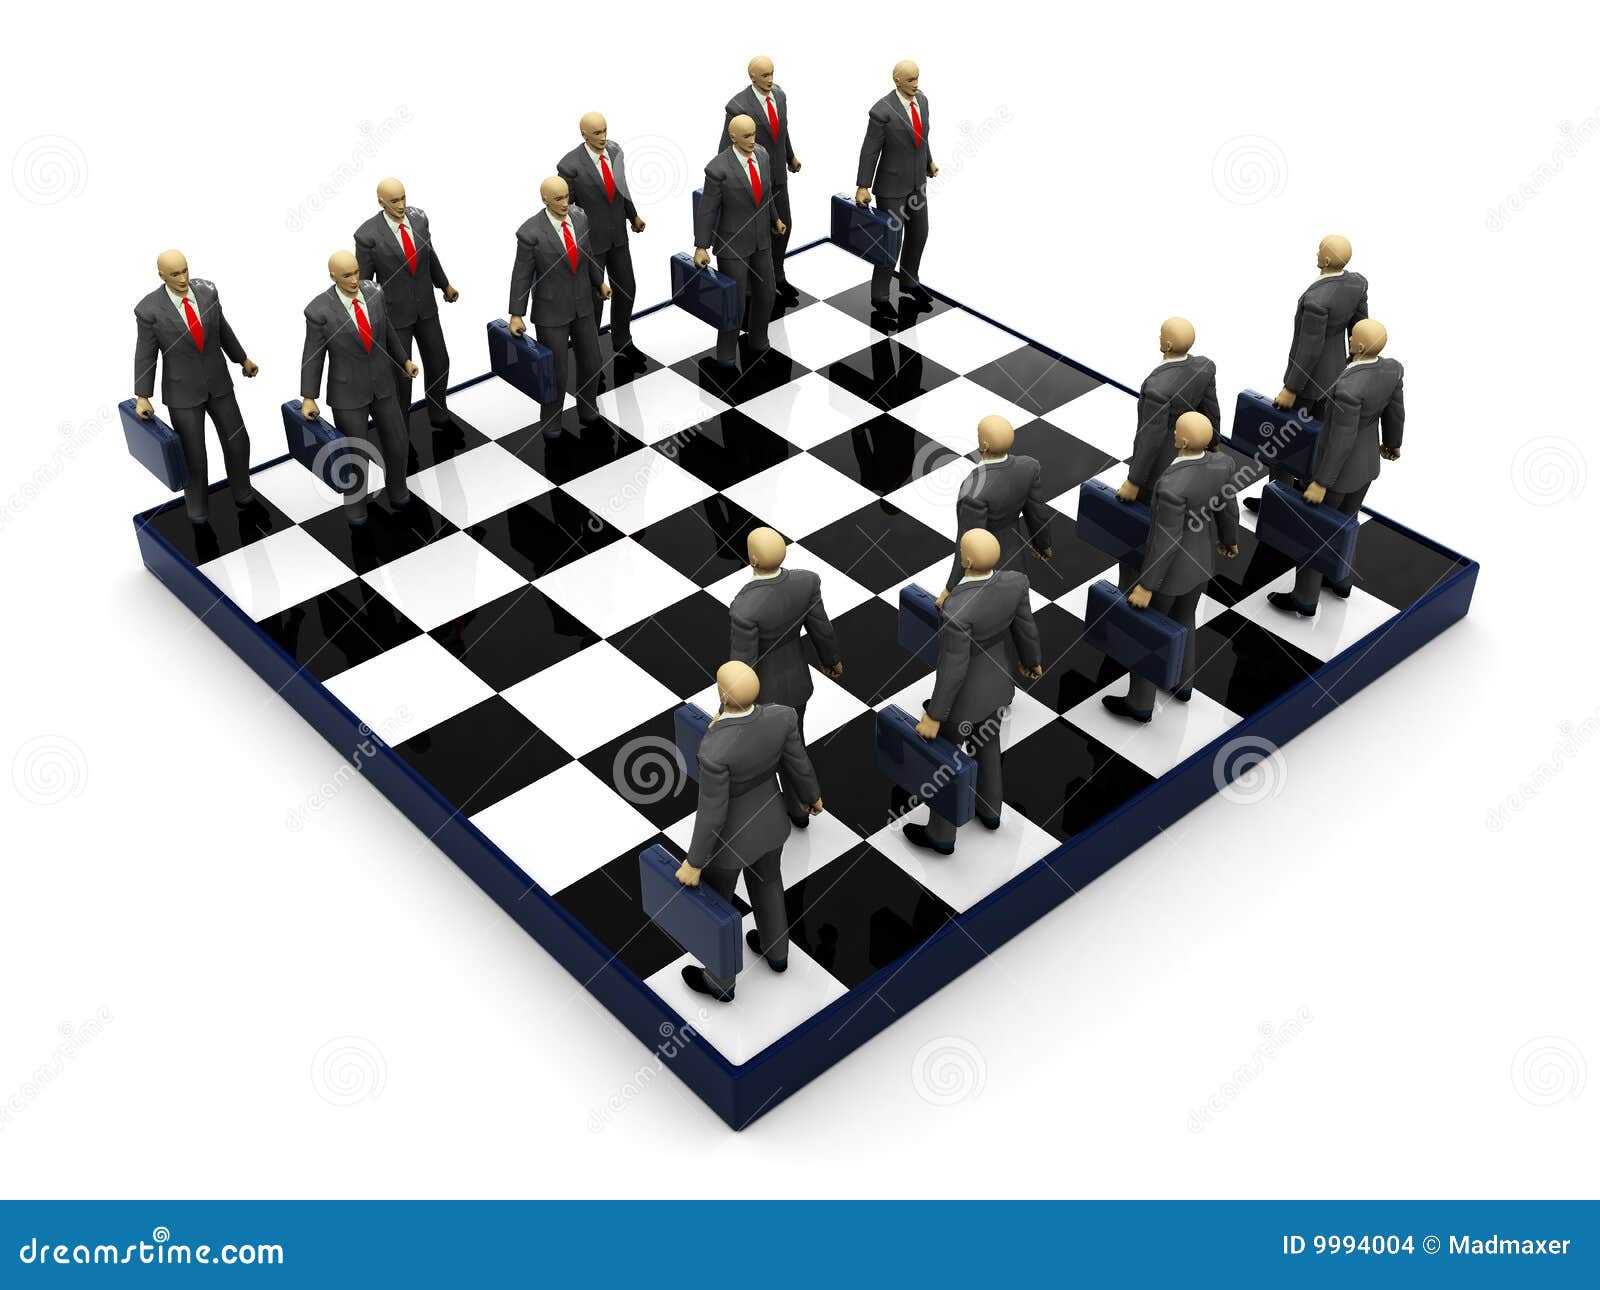 Business chess stock illustration. Illustration of concepts - 9994004